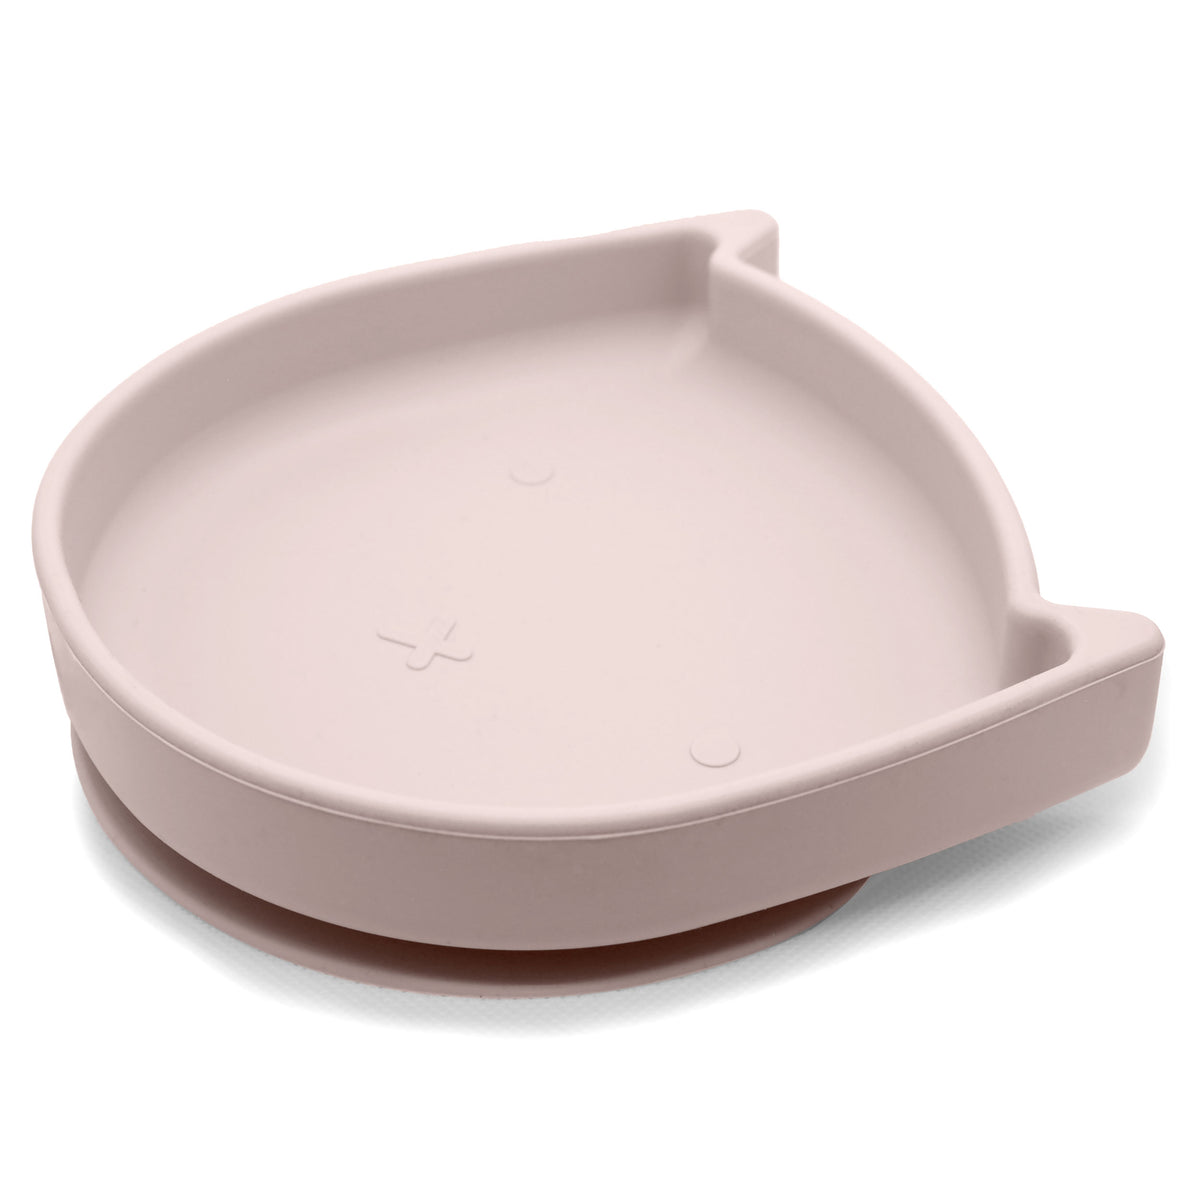 Silikitty | Silicone Toddler Plate